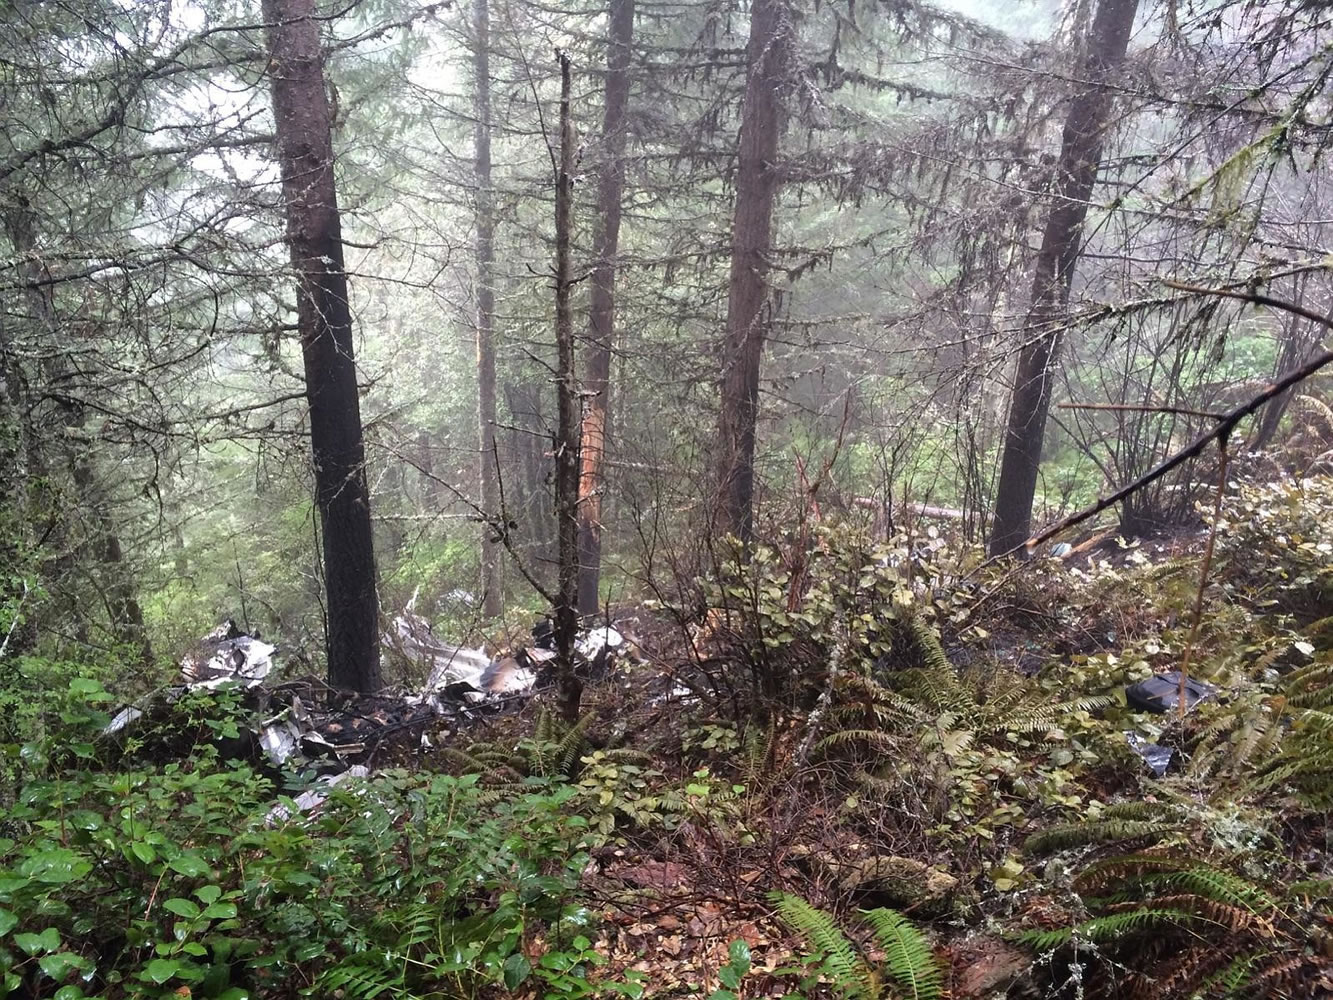 The wreckage of a small airplane bound for Vancouver was found in Oregon on April 24.